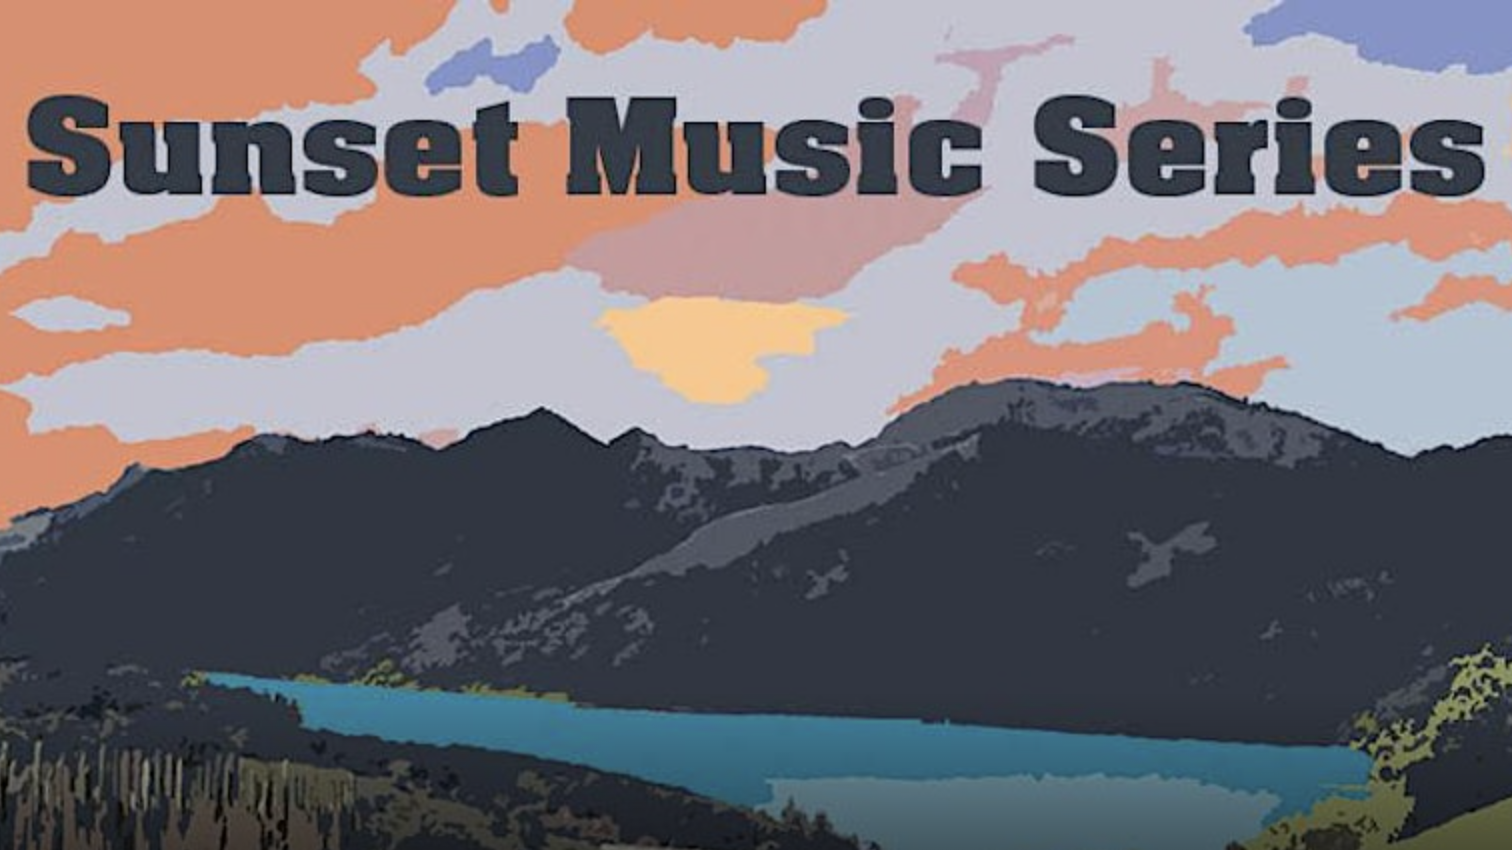 A mountainous landscape near a lake at sunset. The sky transitions from orange to pink and purple hues. "Sunset Music Series" is prominently displayed in bold letters at the top.